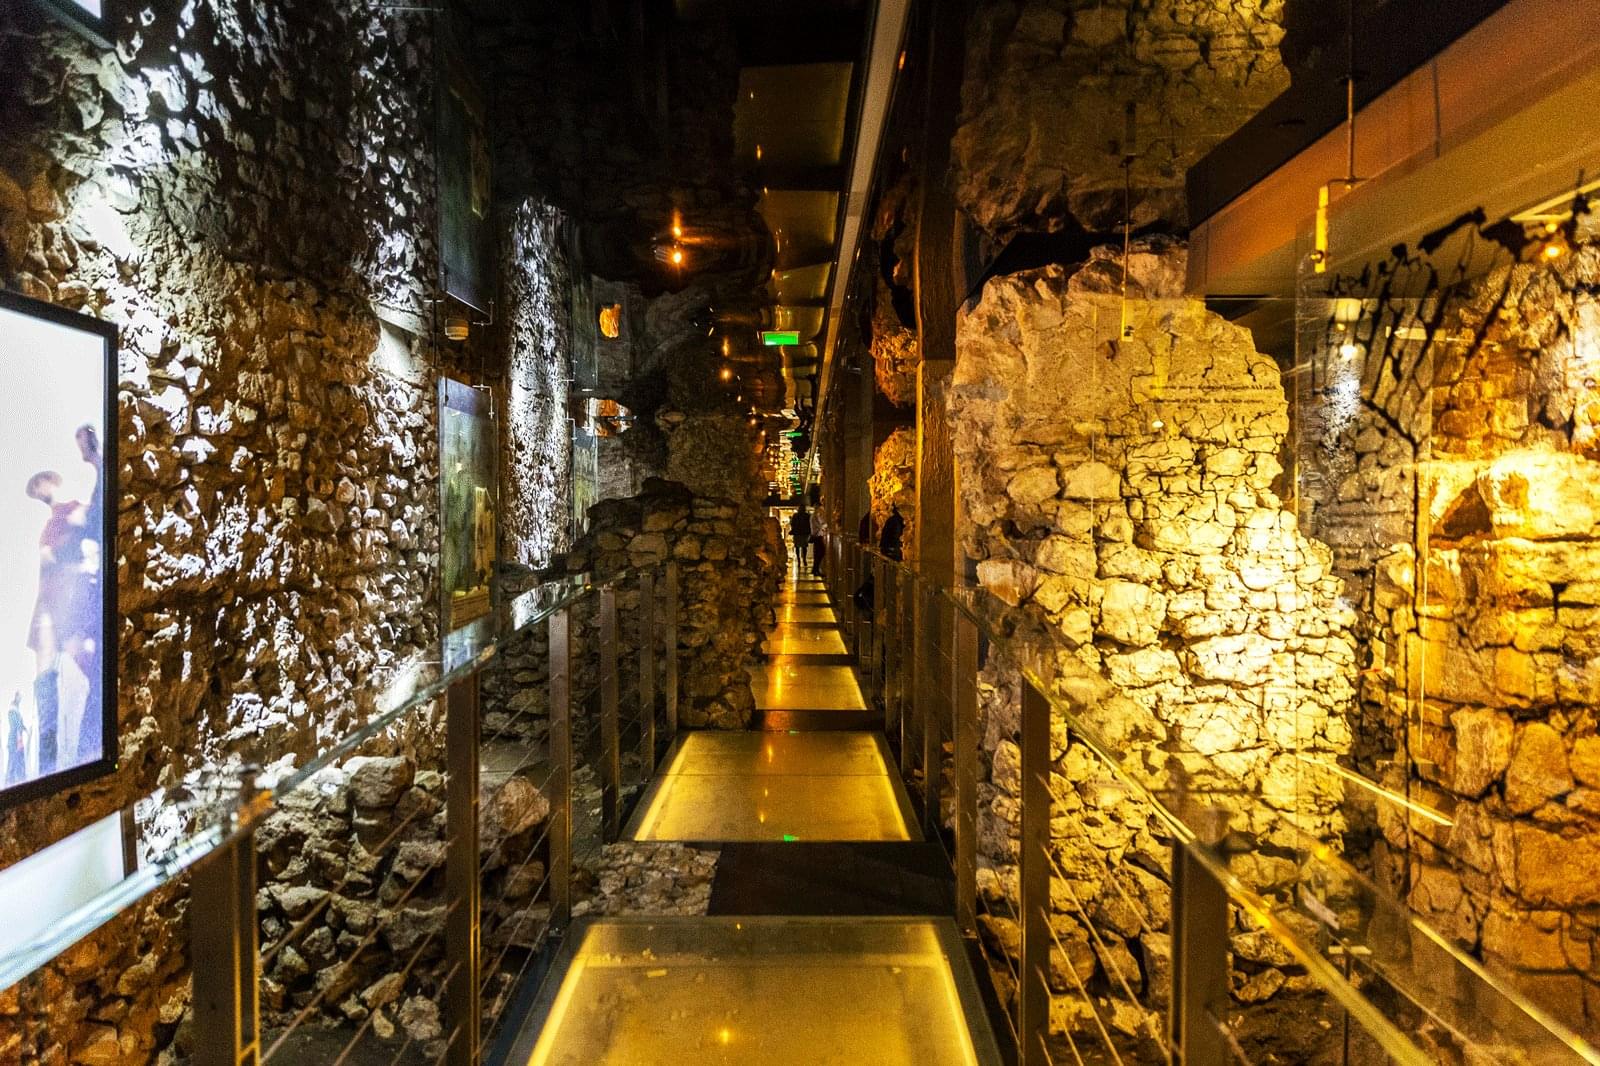 Rynek Underground Museum Tickets and Guided Tours